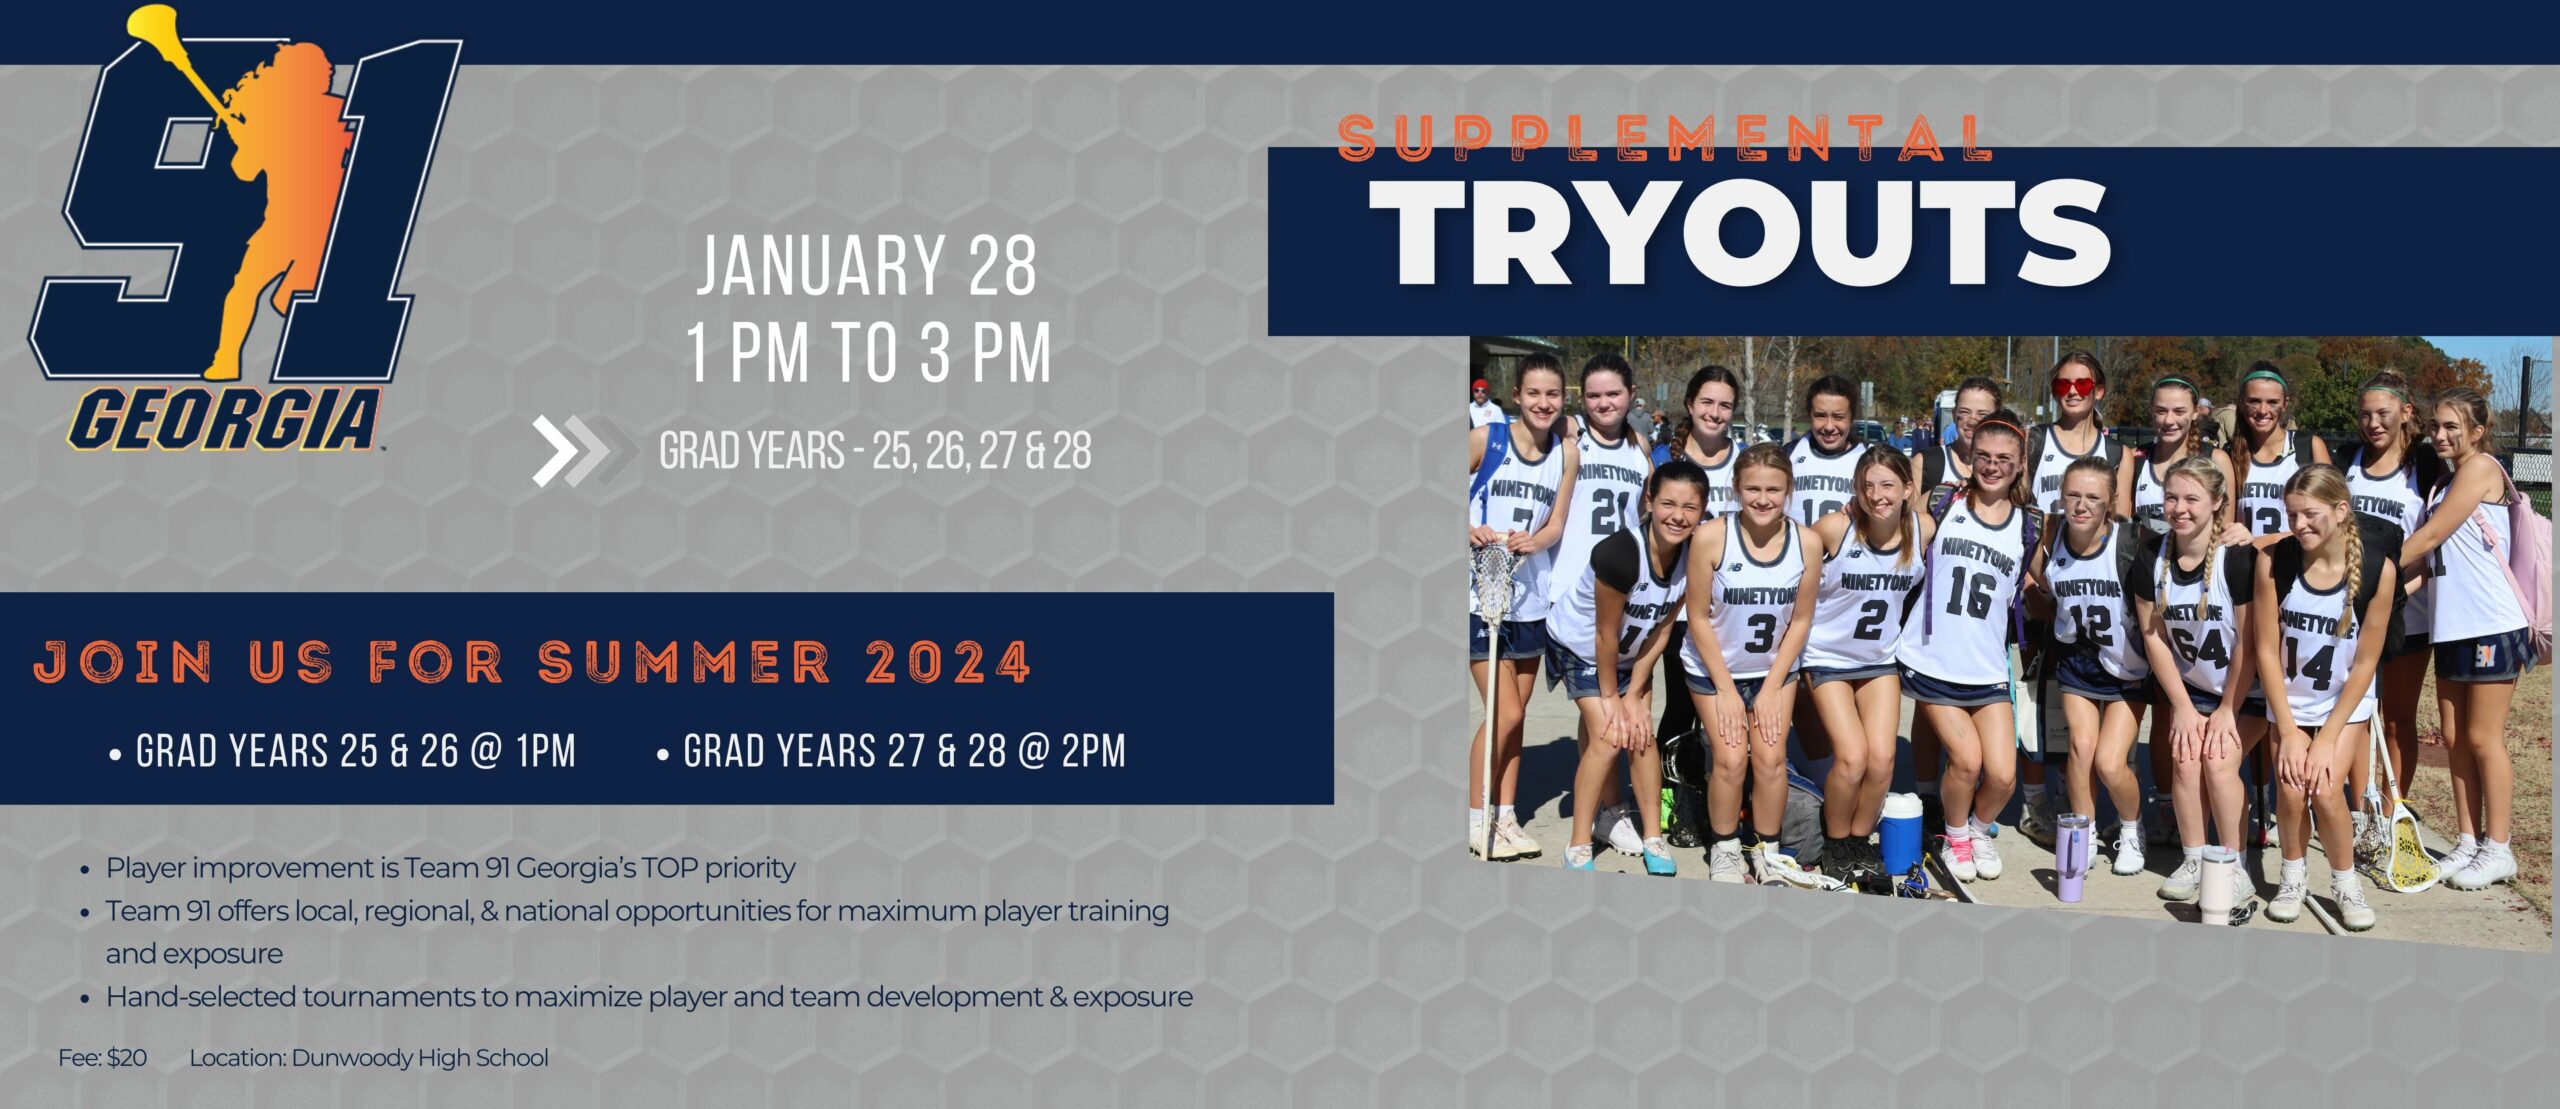 Girls Supplemental Tryout &#8211; January 28, 2024